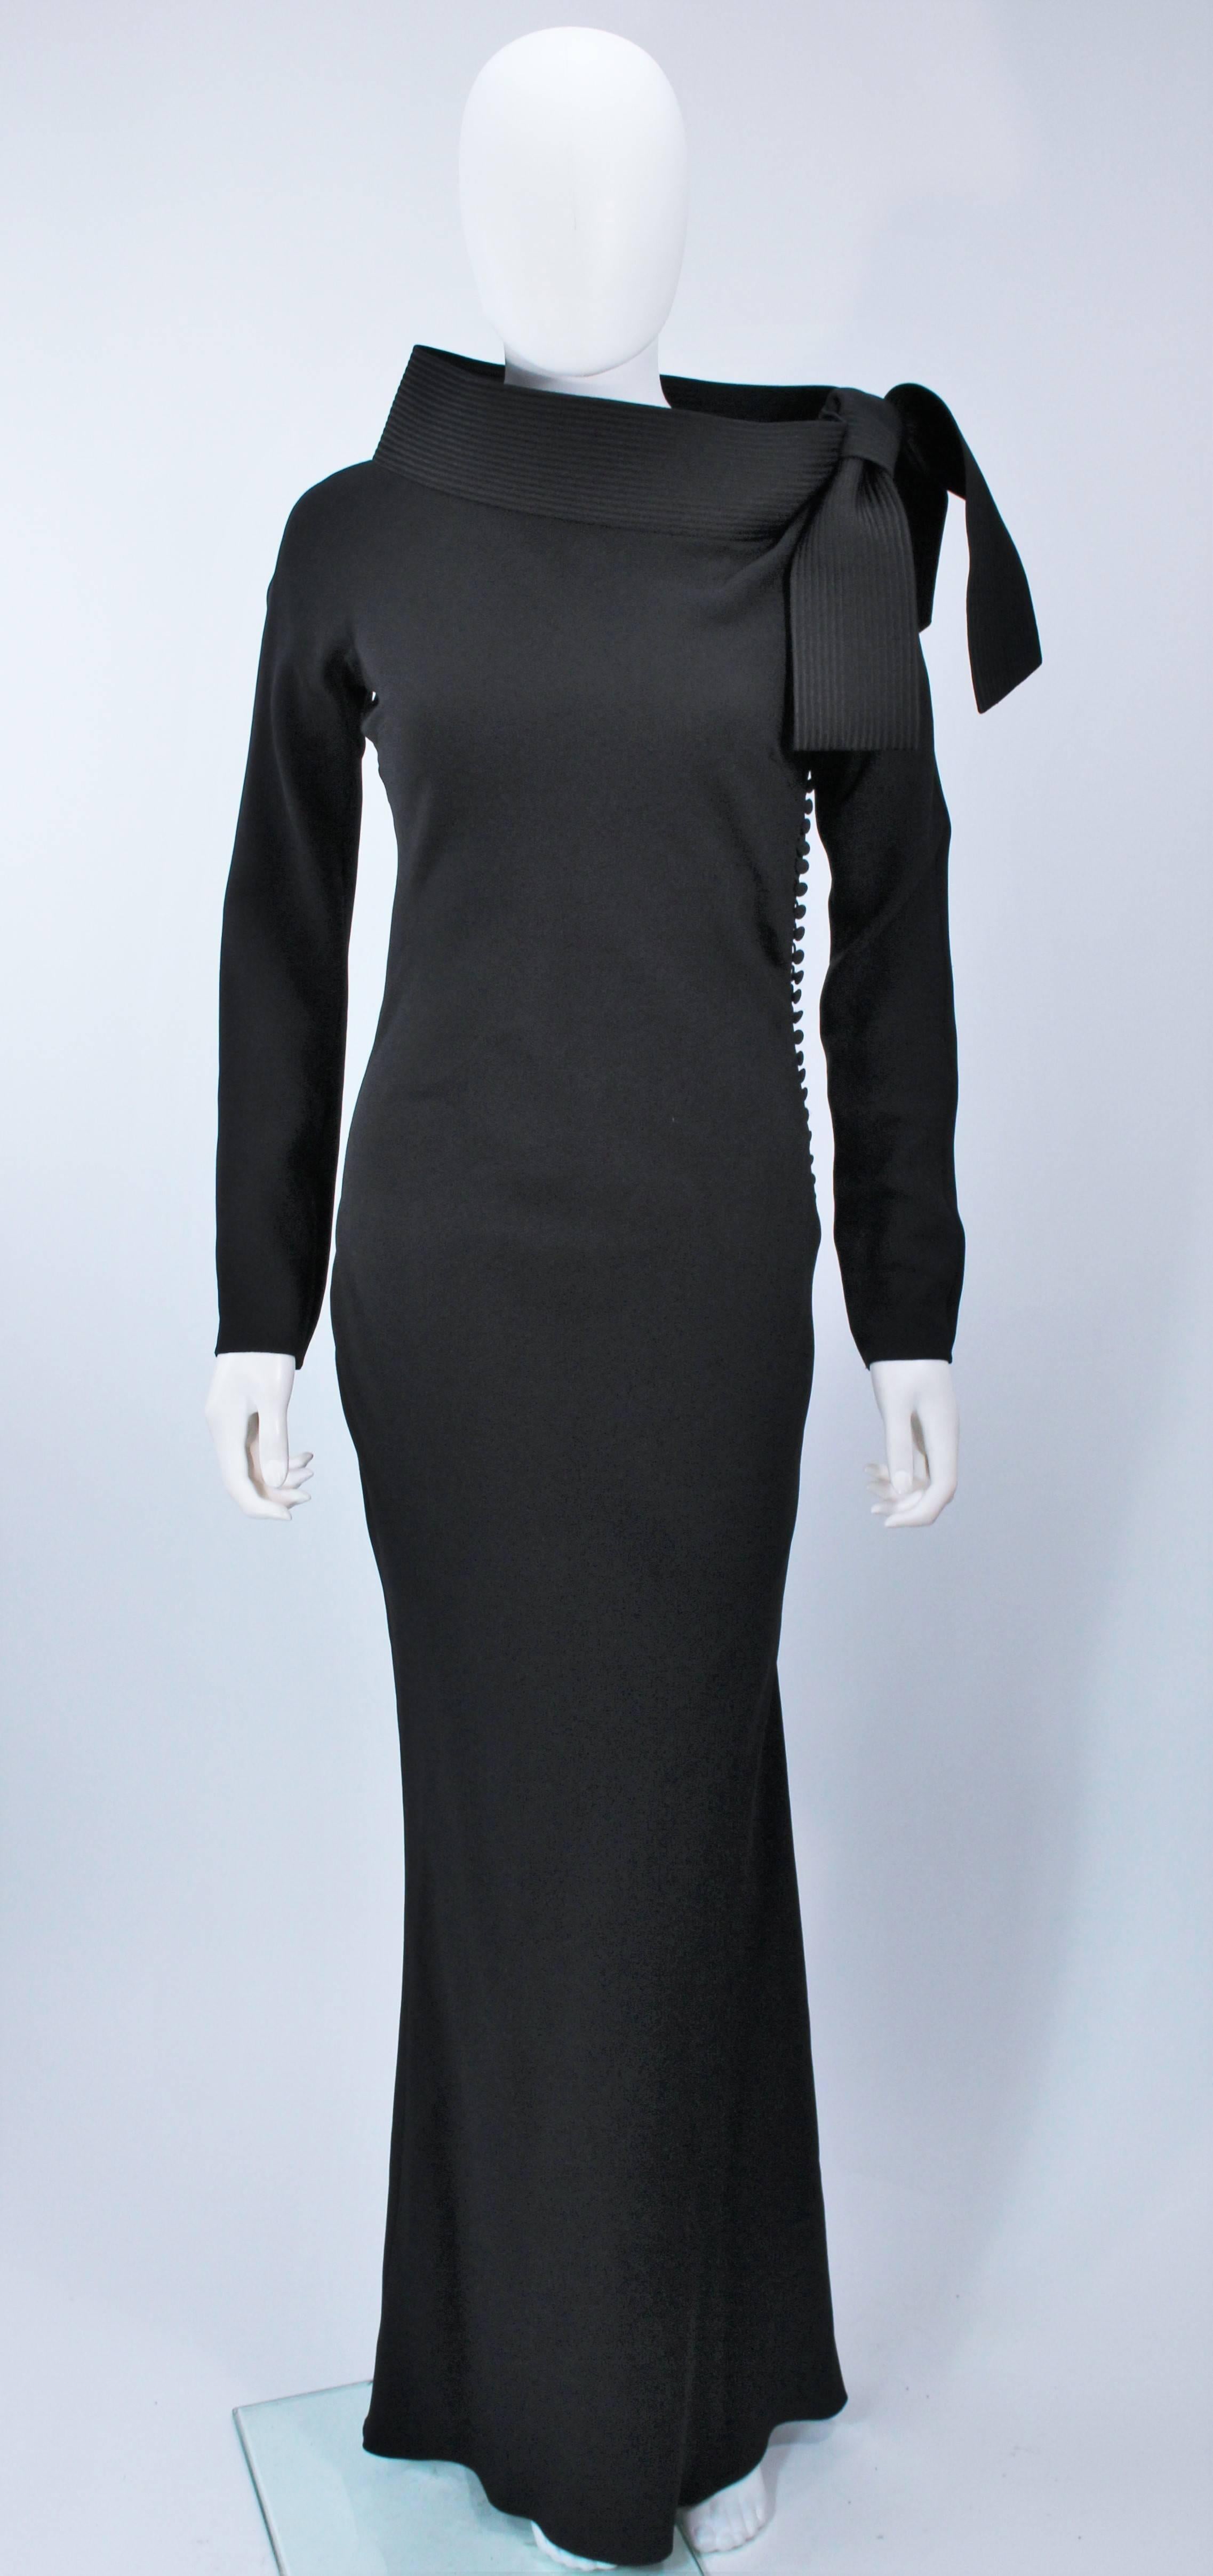  This Christian Dior gown is composed of a black crepe. Features an exaggerated collar with bow and top stitch detailing. There are side button closures. In excellent  condition. 

**Please cross-reference measurements for personal accuracy. 